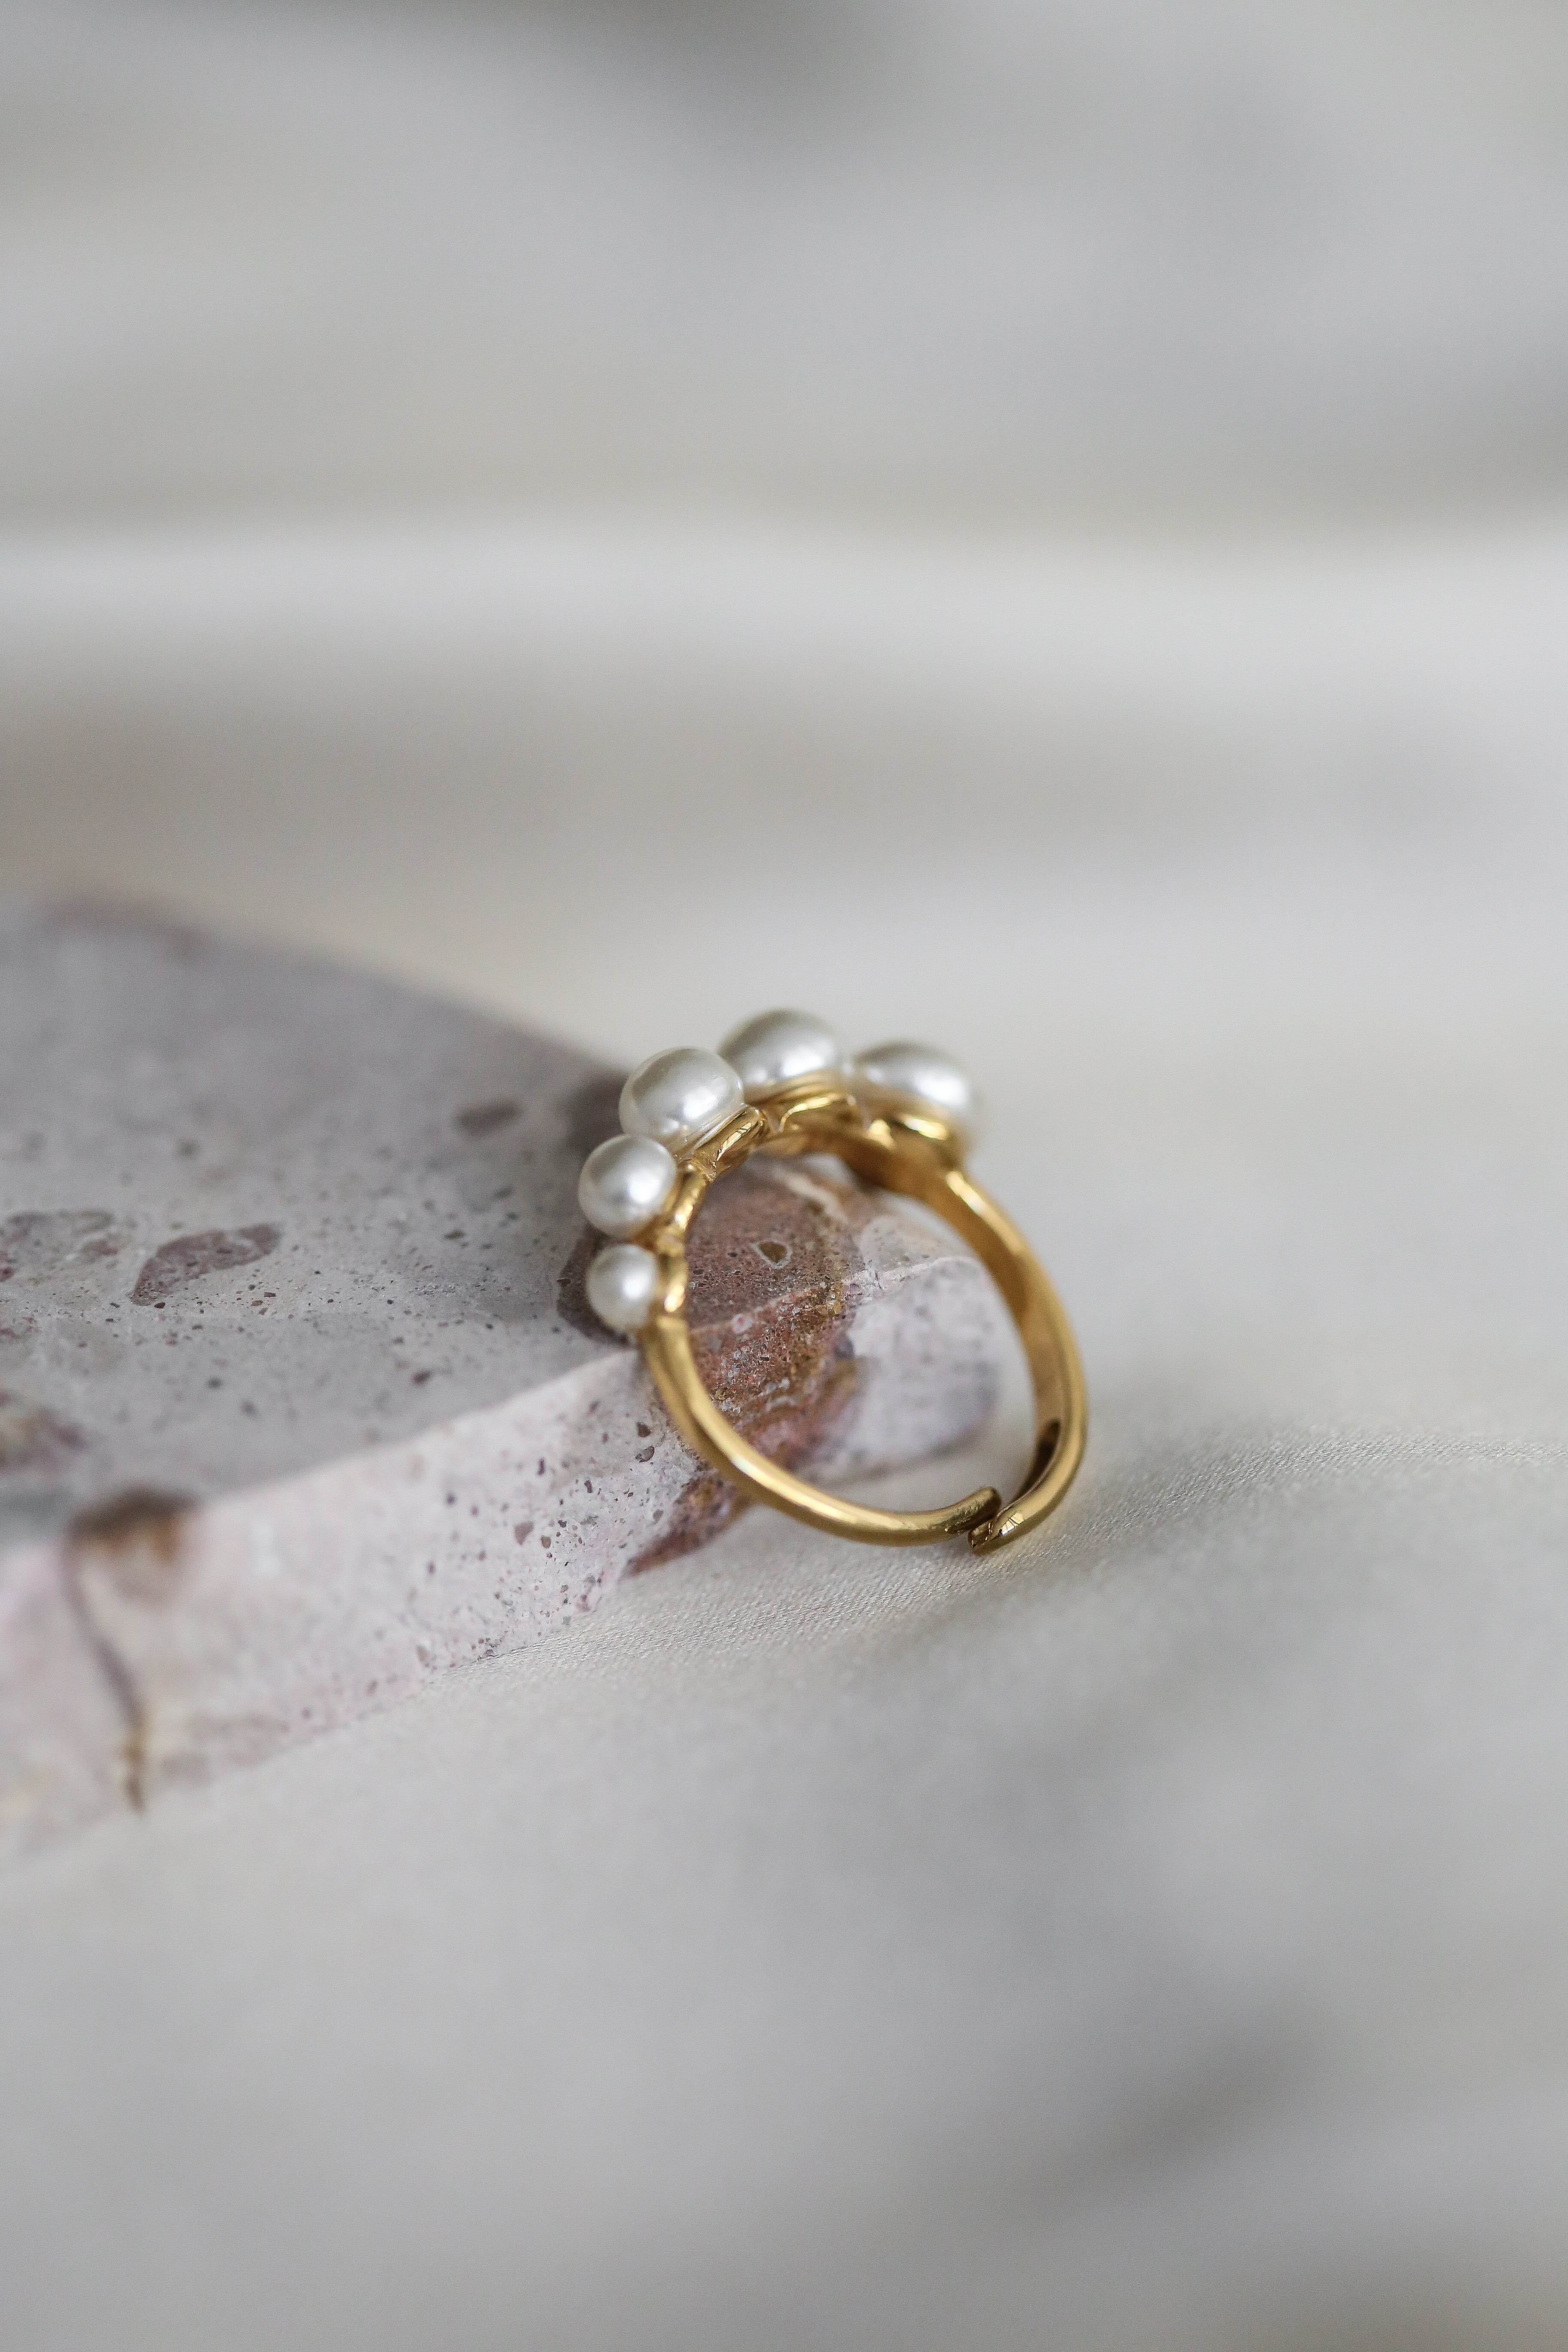 Nathalie Ring - Boutique Minimaliste has waterproof, durable, elegant and vintage inspired jewelry